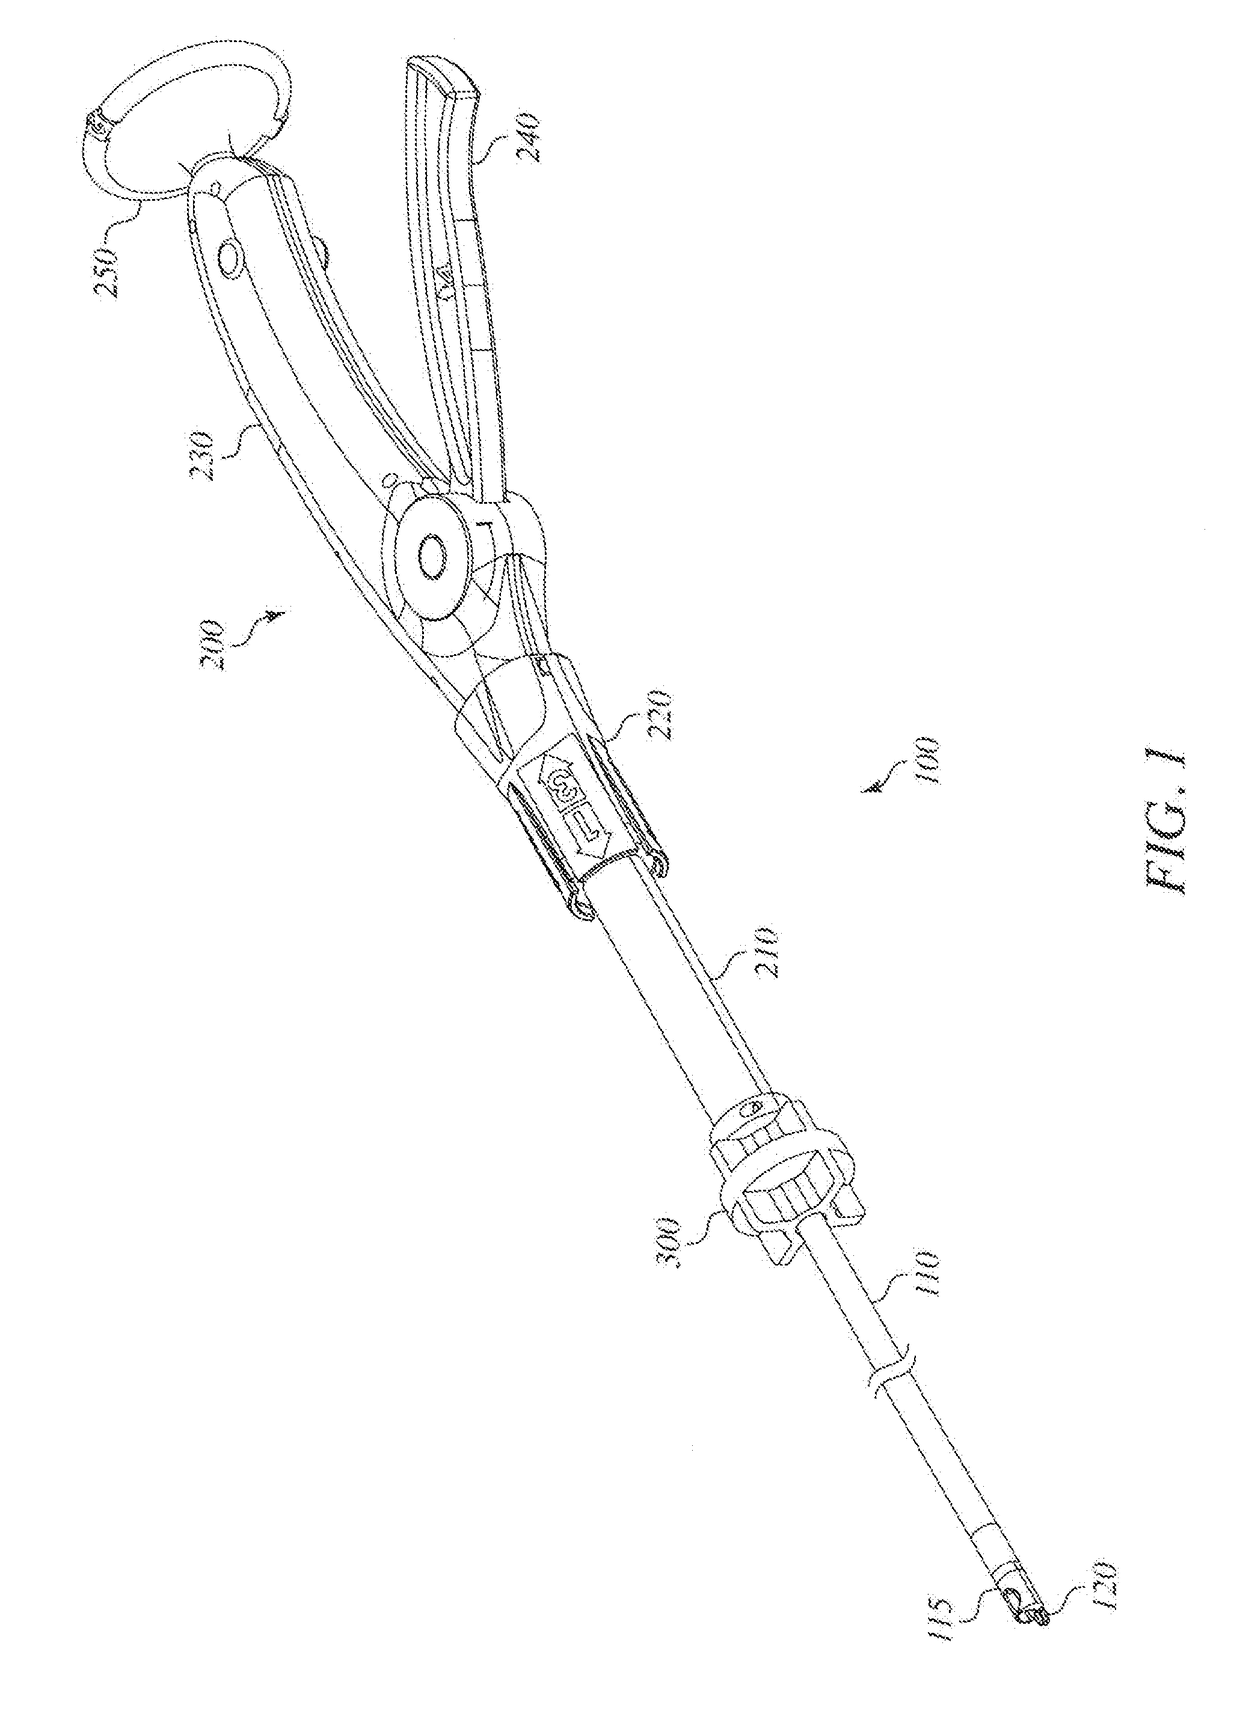 Suturing device and method of use